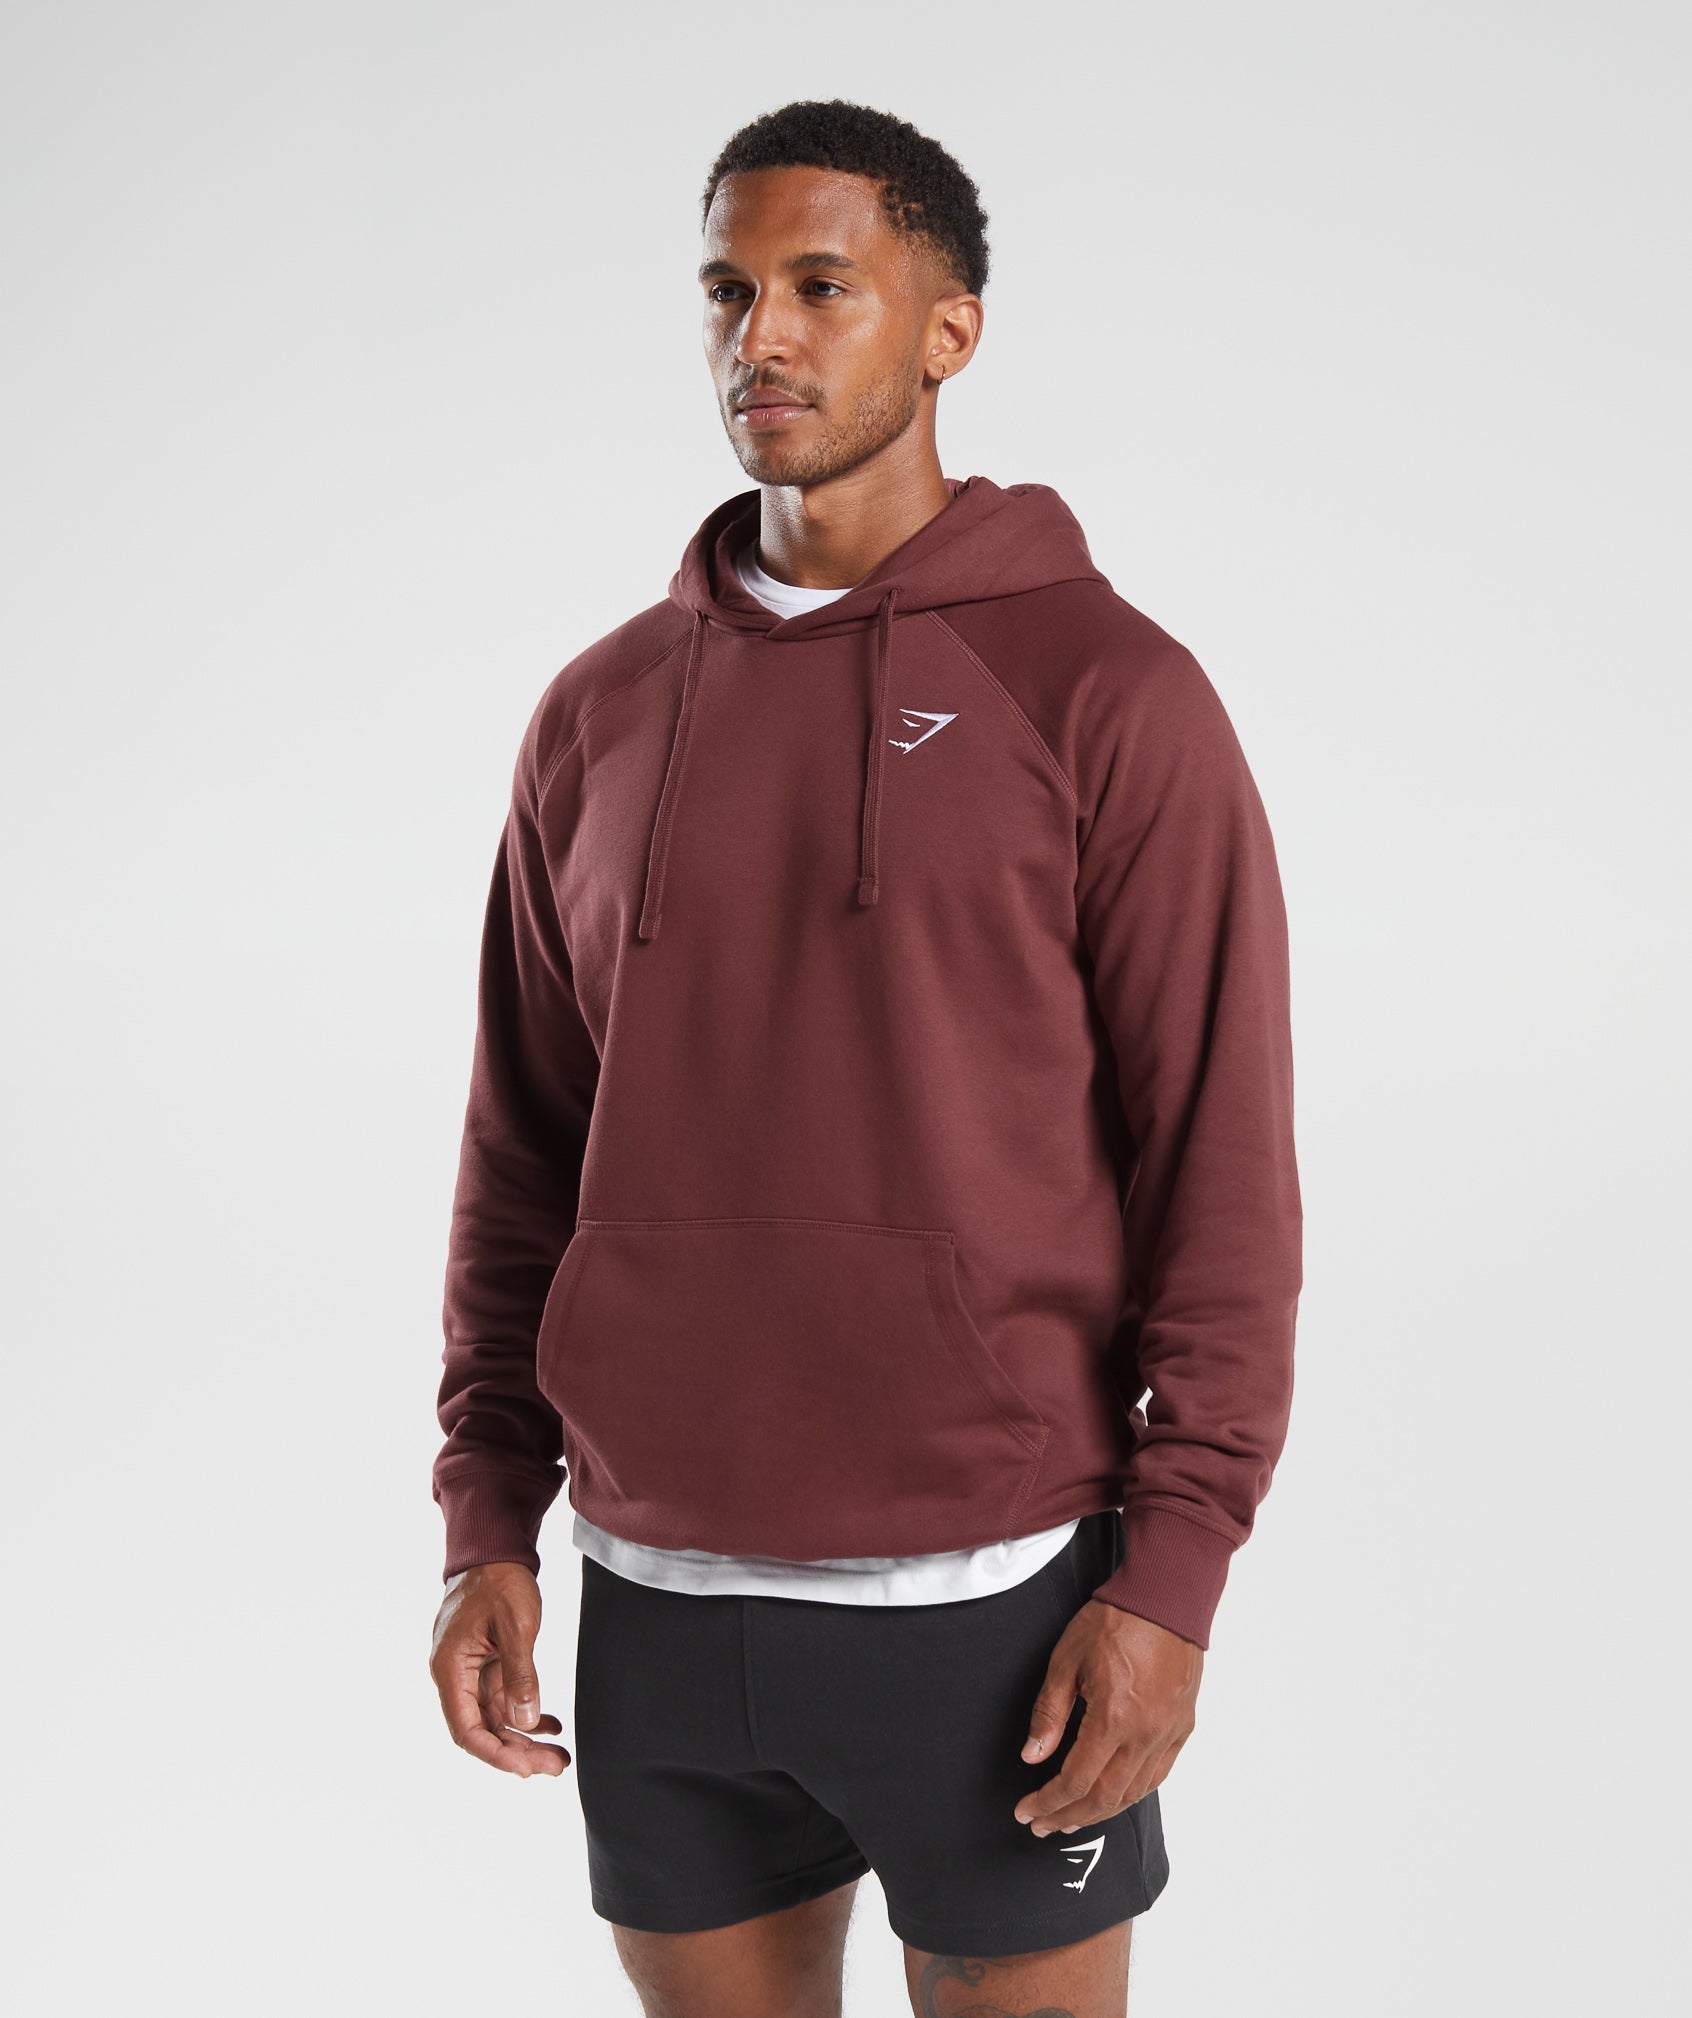 Crest Hoodie in Washed Burgundy - view 3